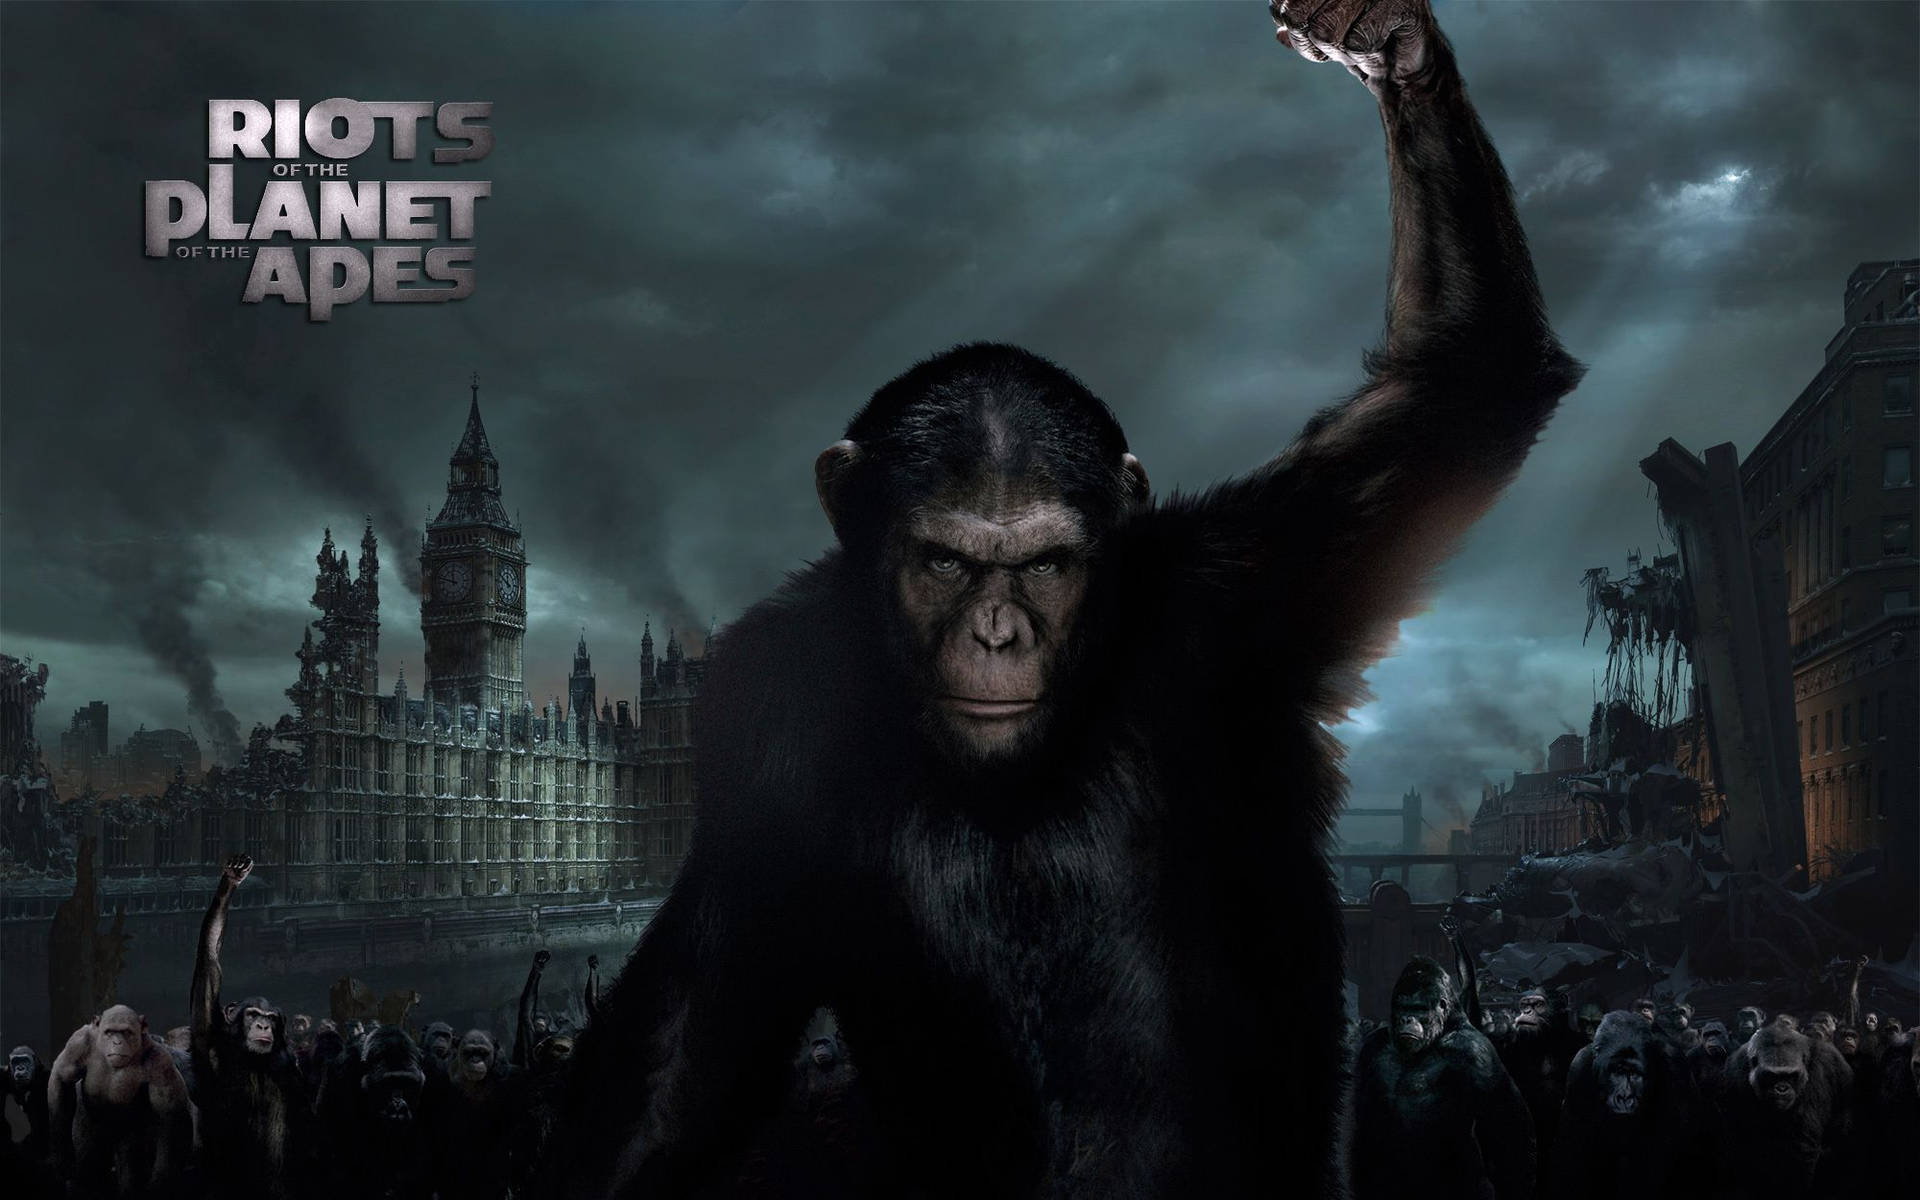 Planet of the Apes Trilogy Wallpaper by Thekingblader995 on DeviantArt